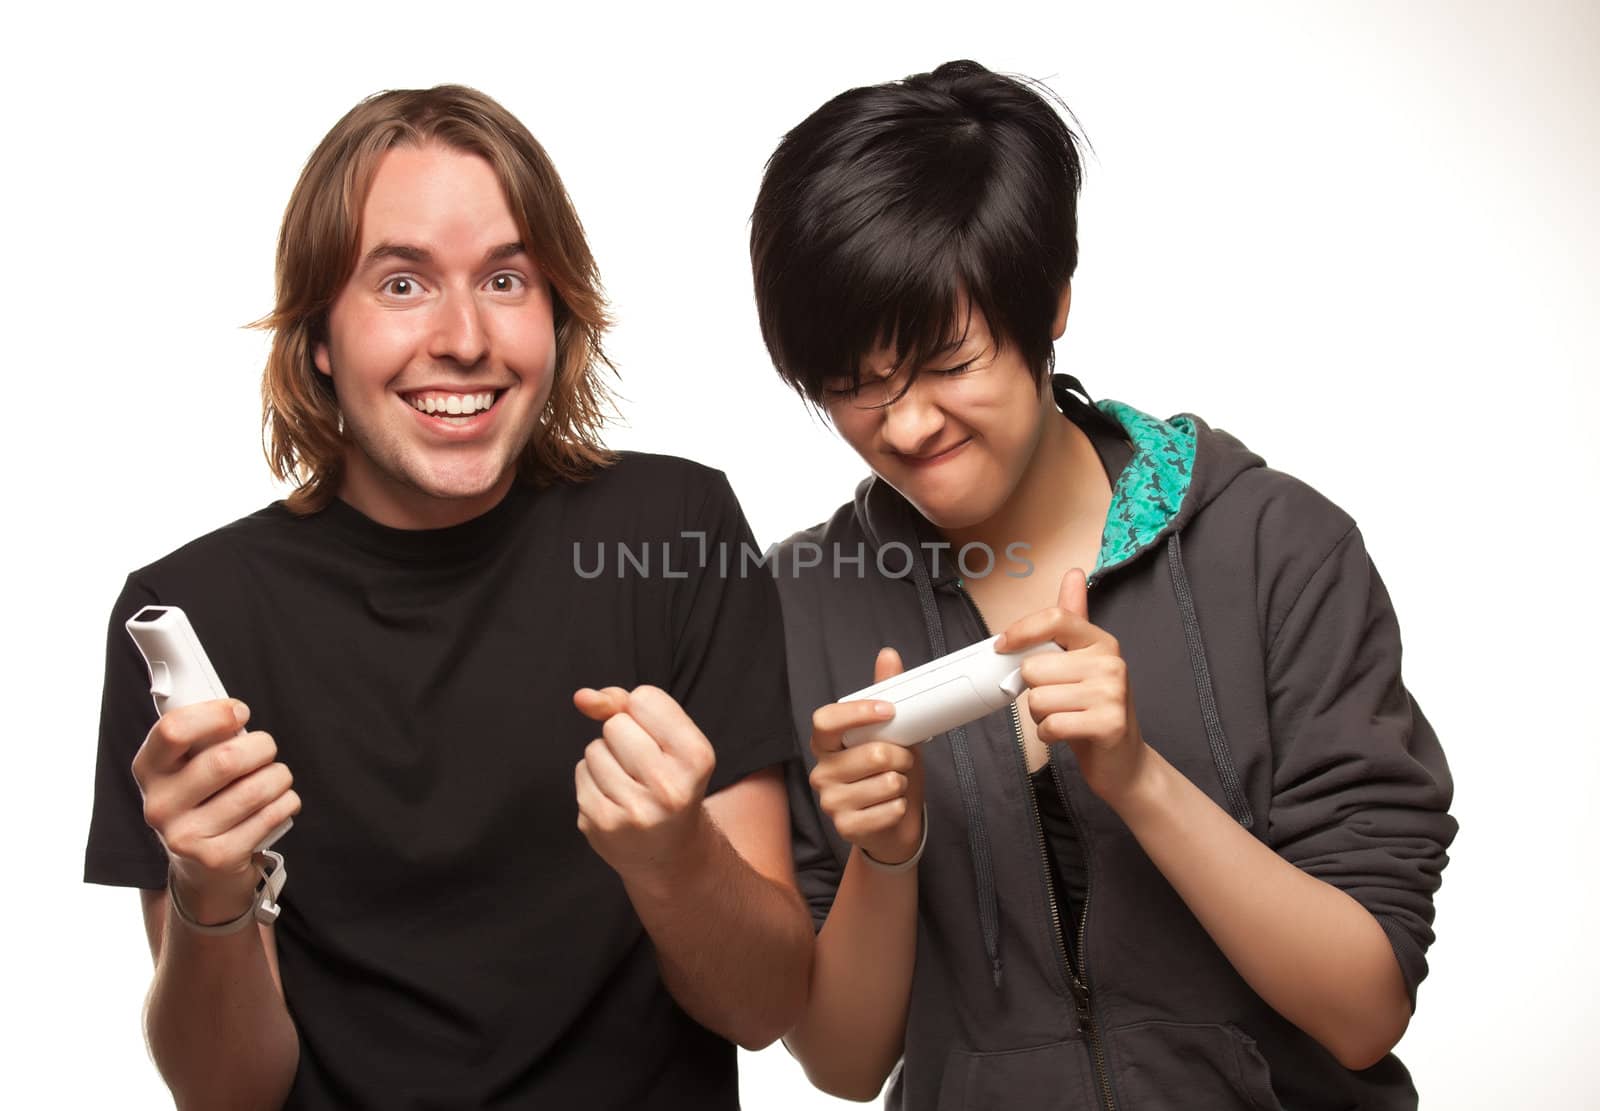 Fun Happy Mixed Race Couple Playing Video Game Remotes Isolated on a White Background.